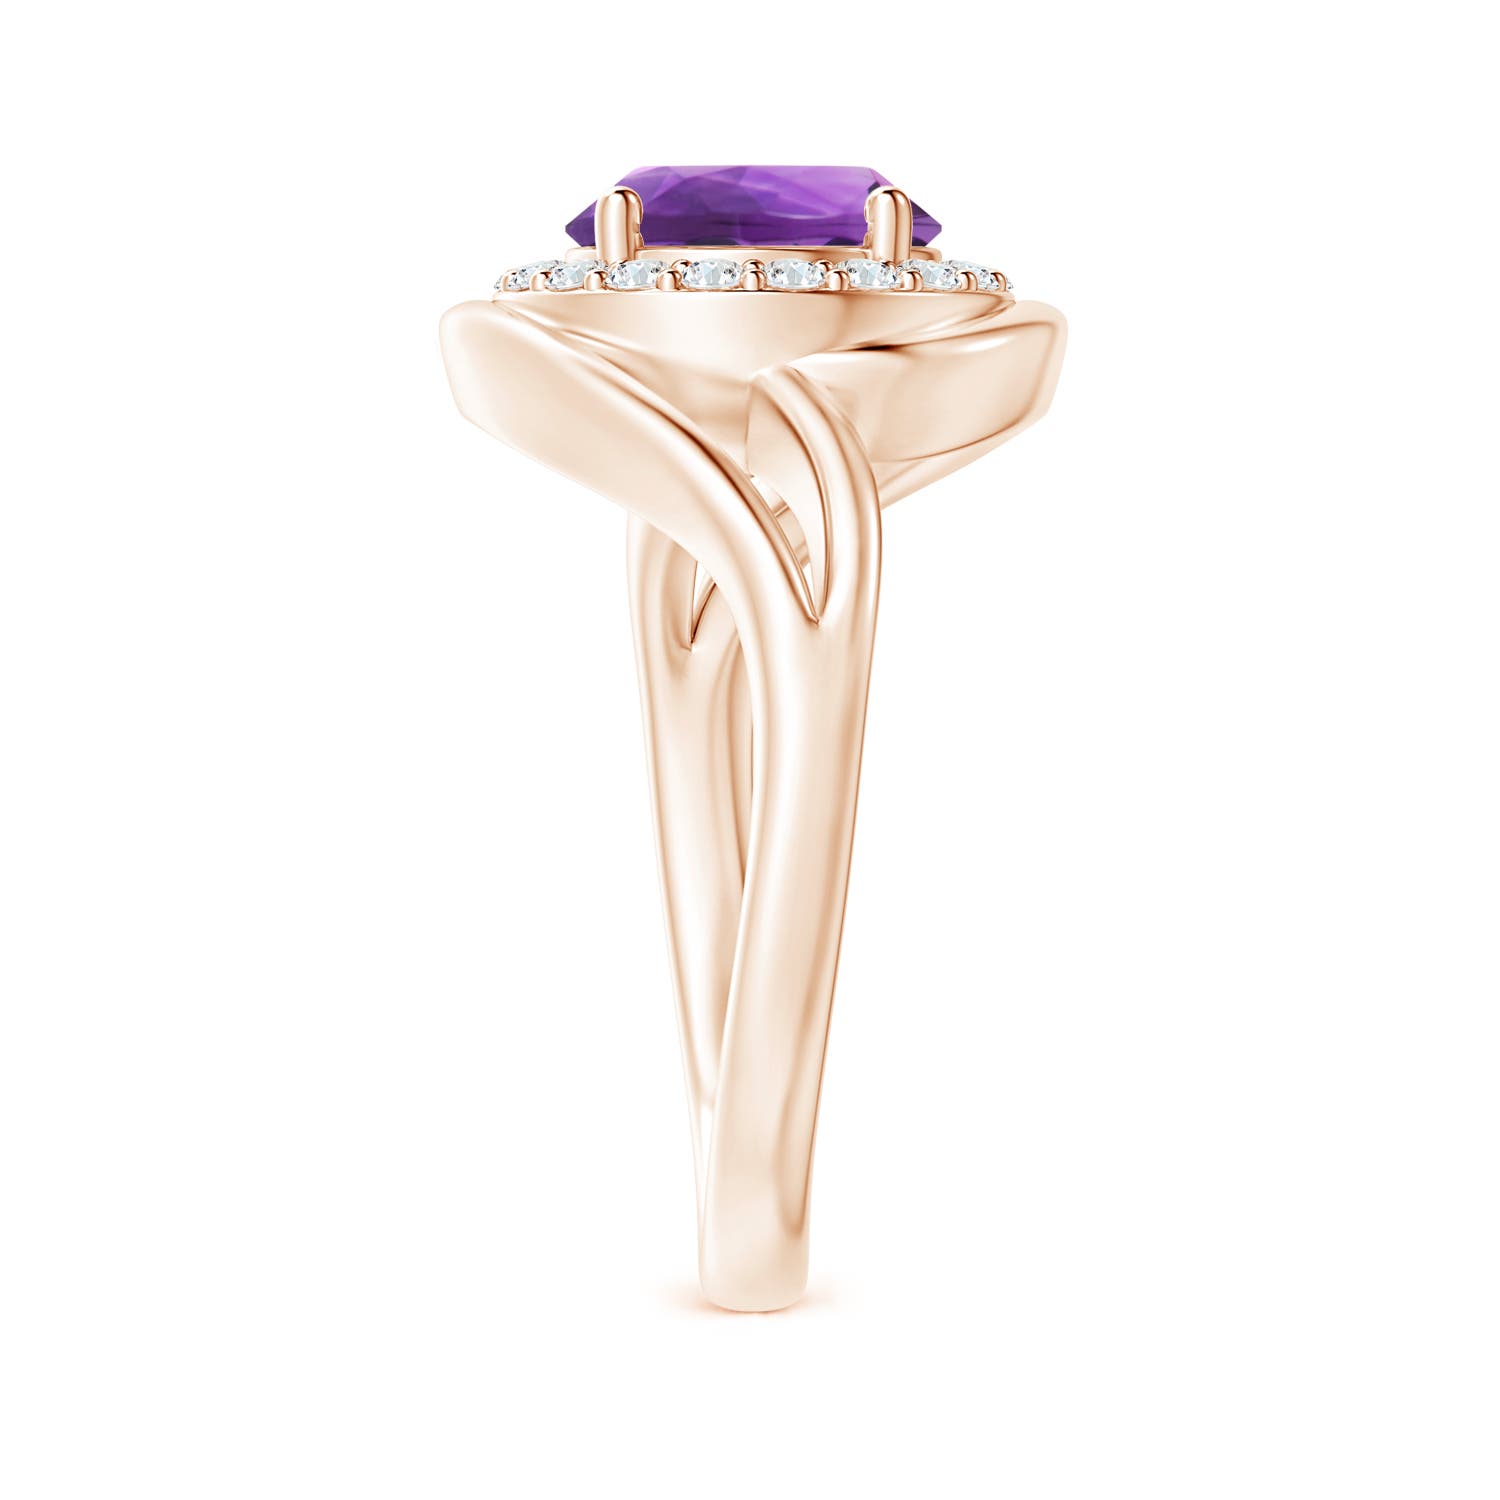 AAA - Amethyst / 1.95 CT / 14 KT Rose Gold